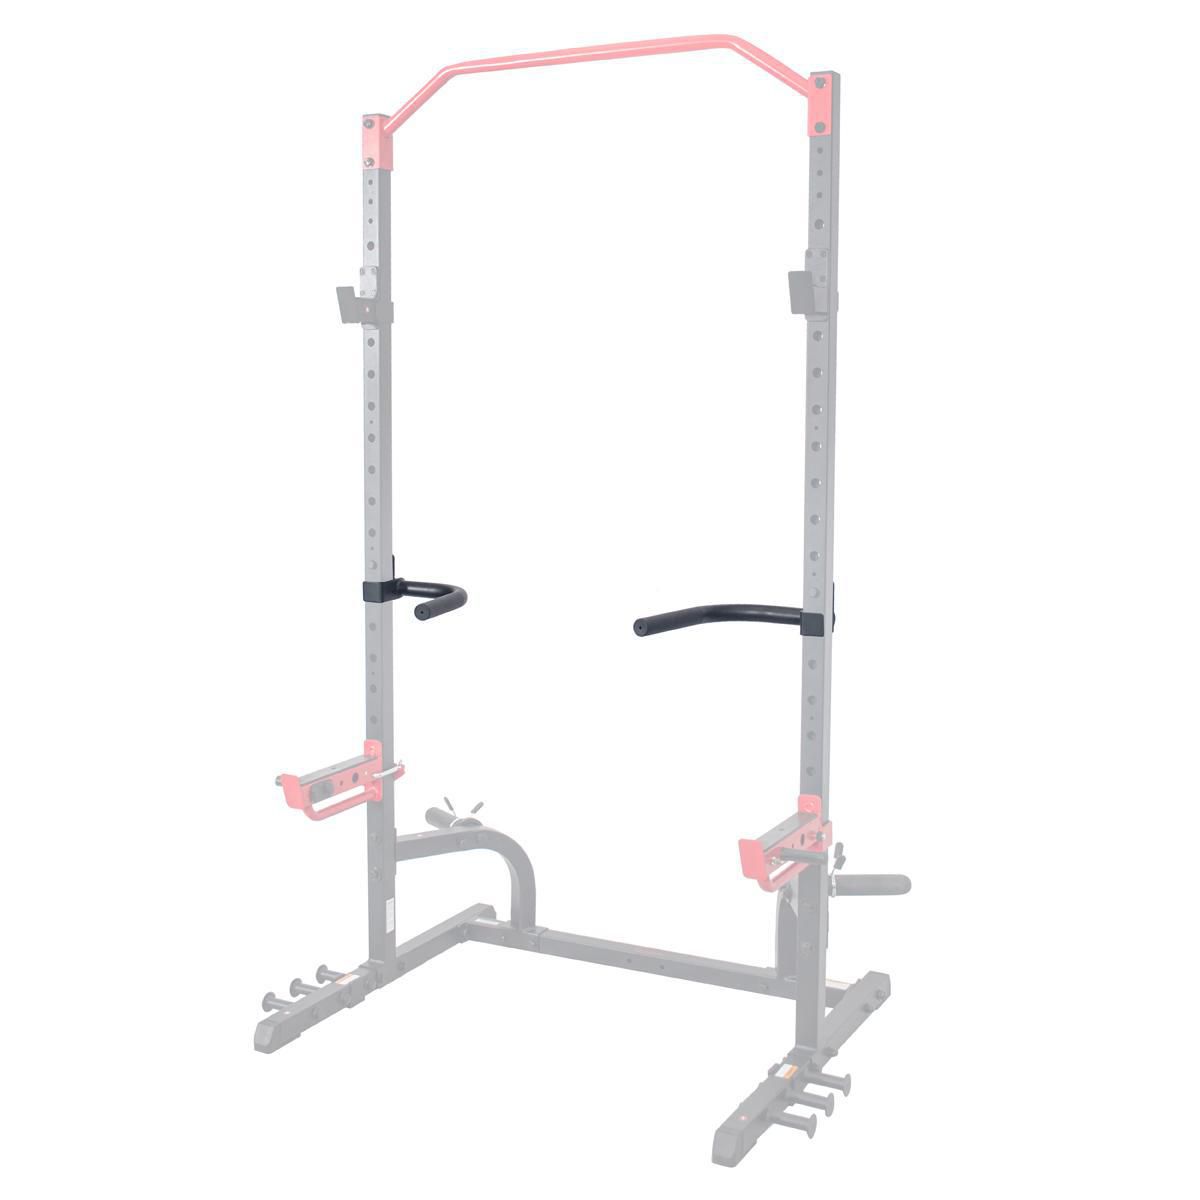 BeneLabel J-Hooks for Power Rack Attachments Fit 2 x 2 Tube with 1'' Hole Power Cages Set of 2 Square Tube Strength Training Power Cage Accessories Squat Rack Accessories 